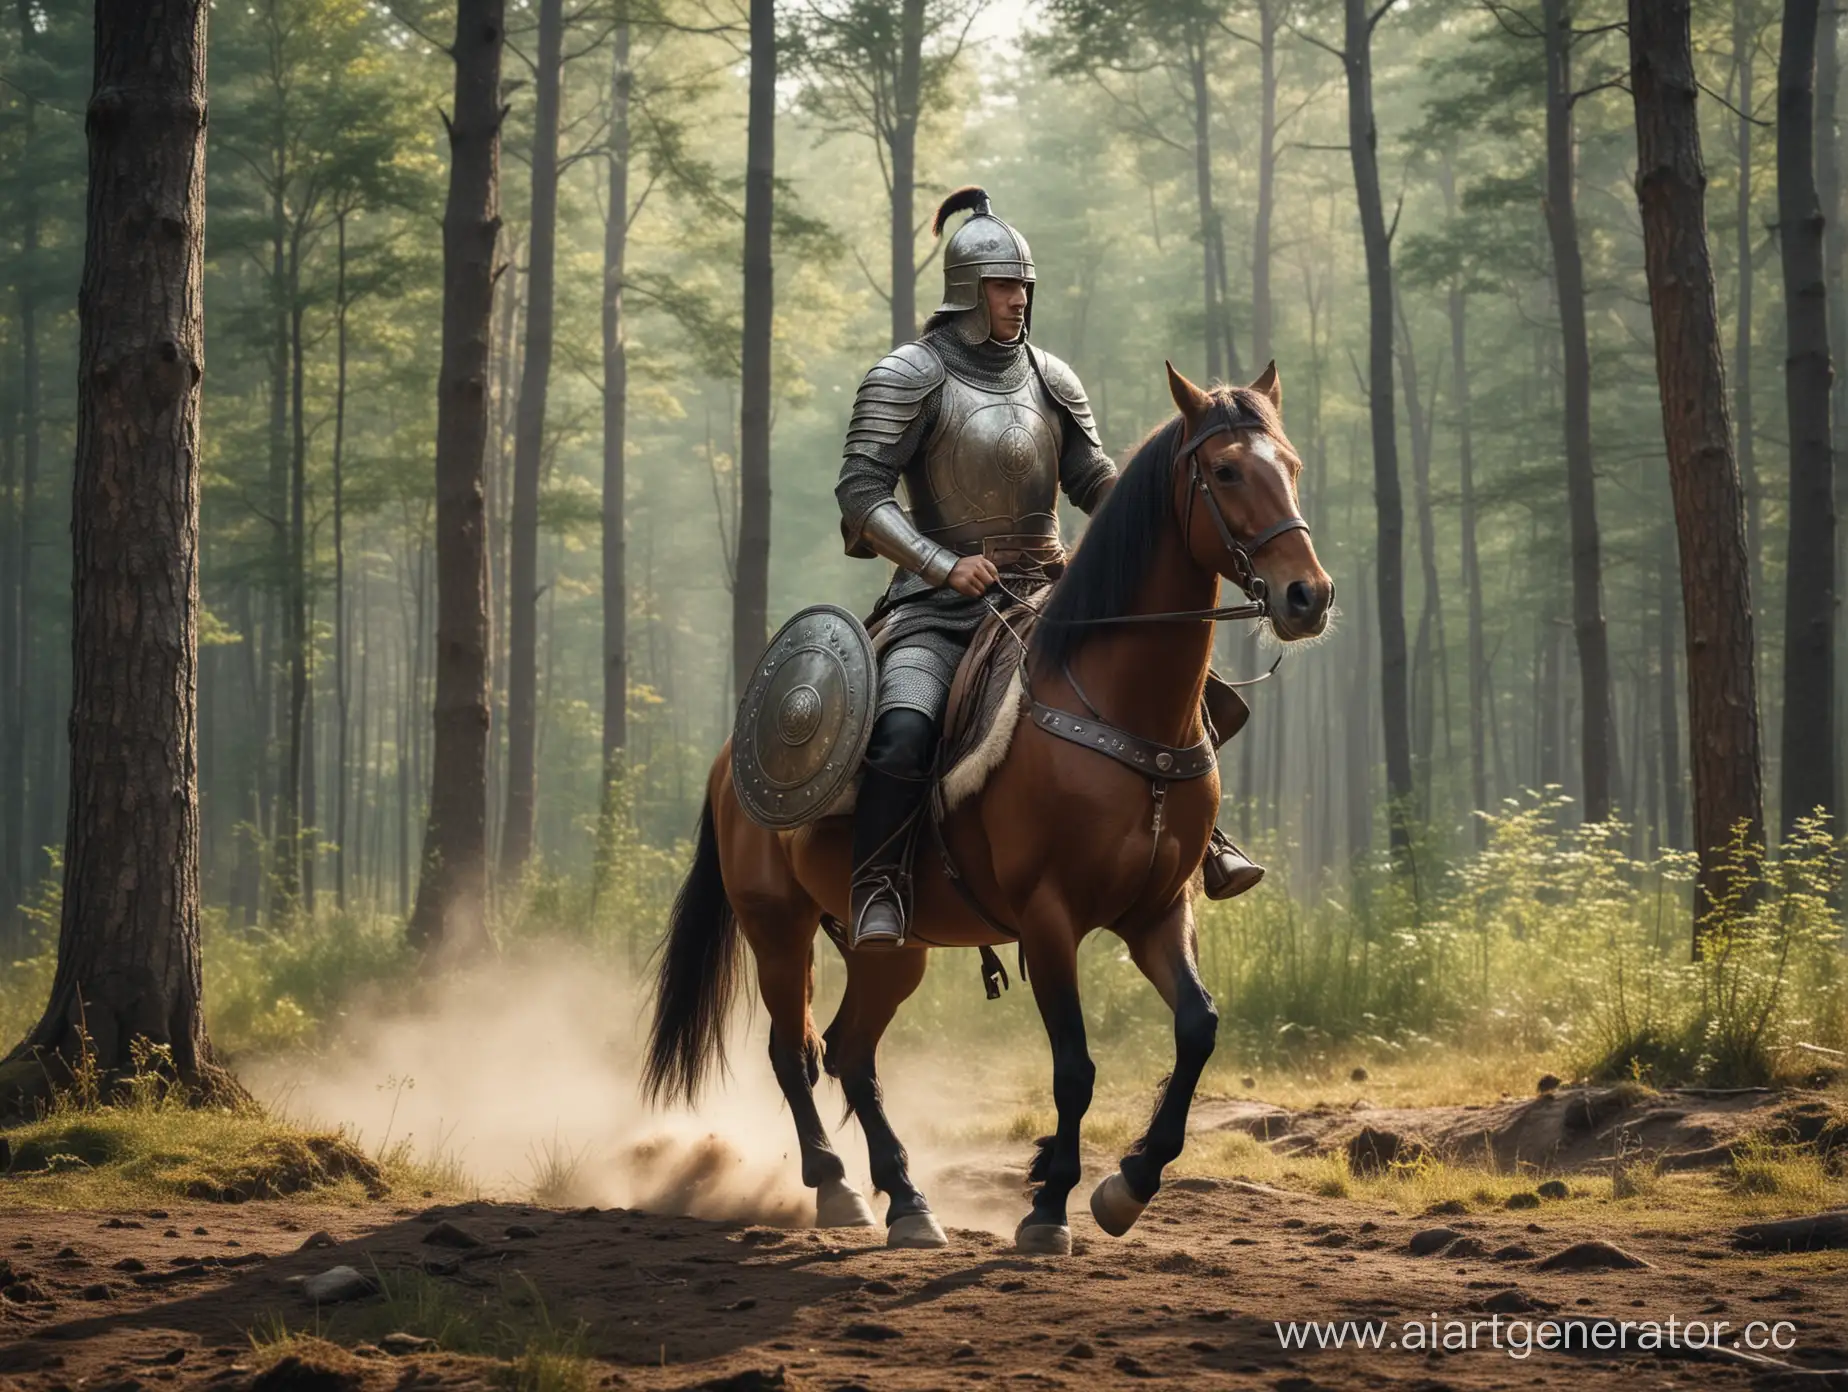 Valiant-Warrior-Riding-Steed-with-Shield-in-a-Majestic-Forest